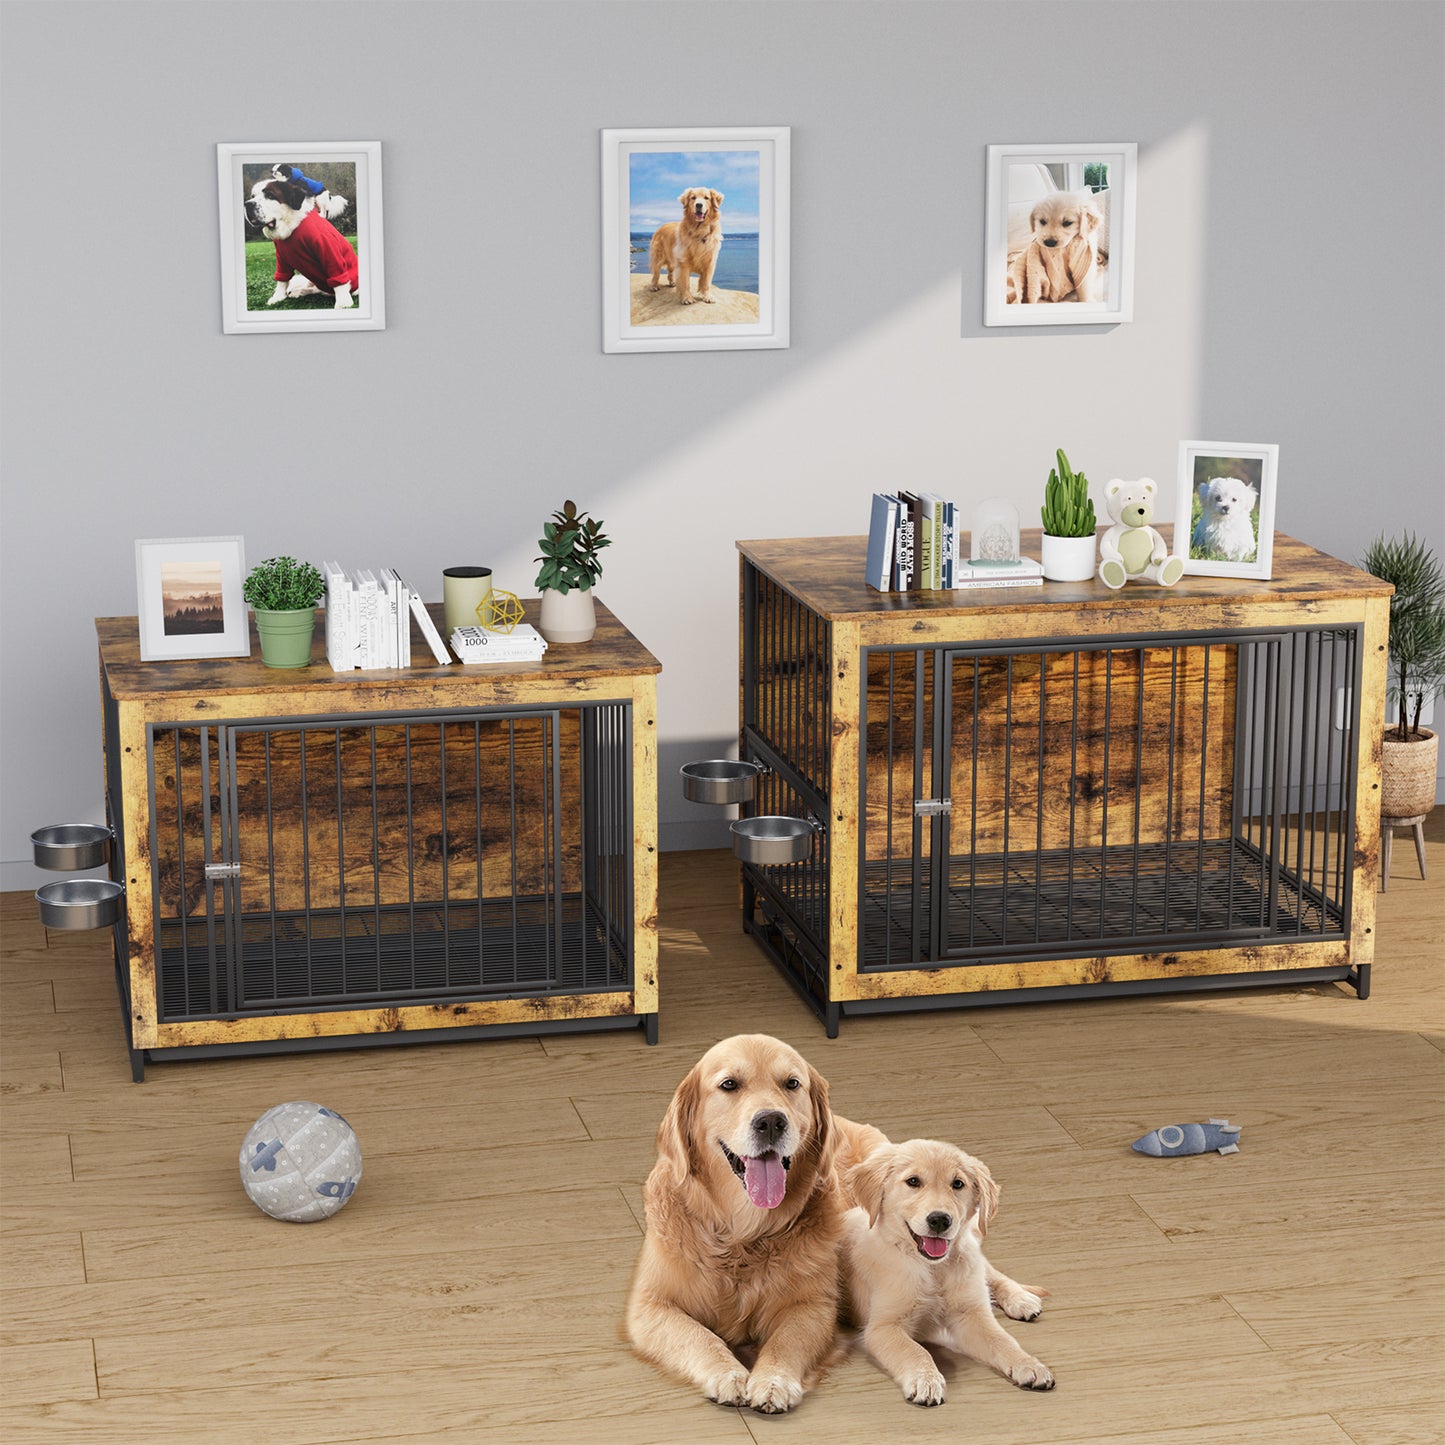 Arlopu Dog Crate Furniture, Modern Wooden End Table Indoor Kennel for Dogs up to 70 lbs, Heavy Duty Dog Cage House with Removable Tray, 2 Stainless Steel Bowls